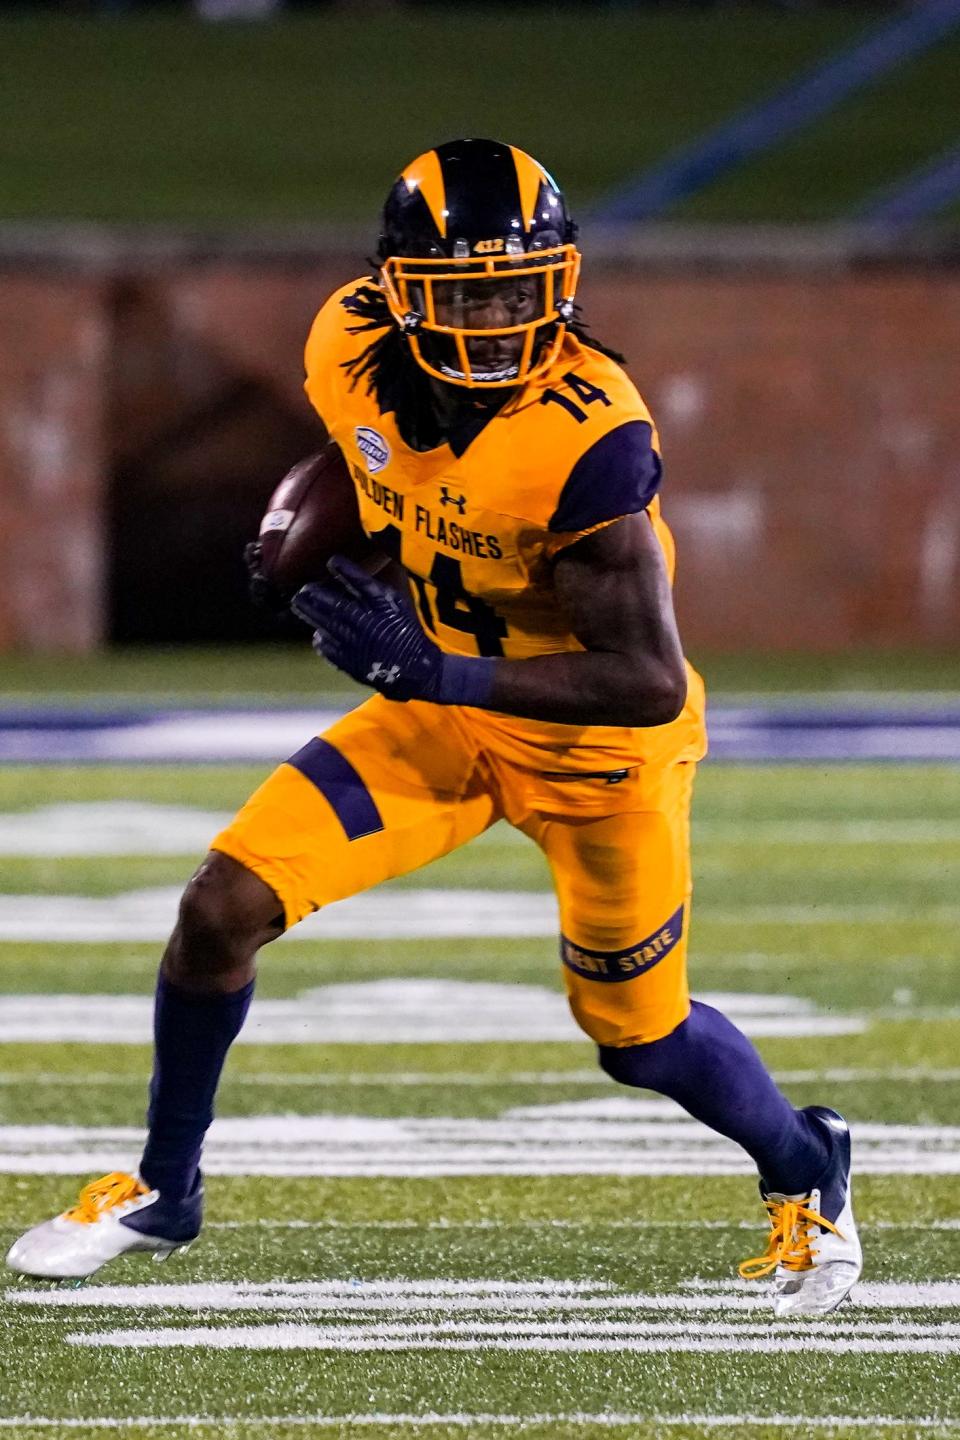 Kent State wide receiver Dante Cephas set career highs with 13 catches for 186 yards and three touchdowns during a victory over Buffalo last October at Dix Stadium.